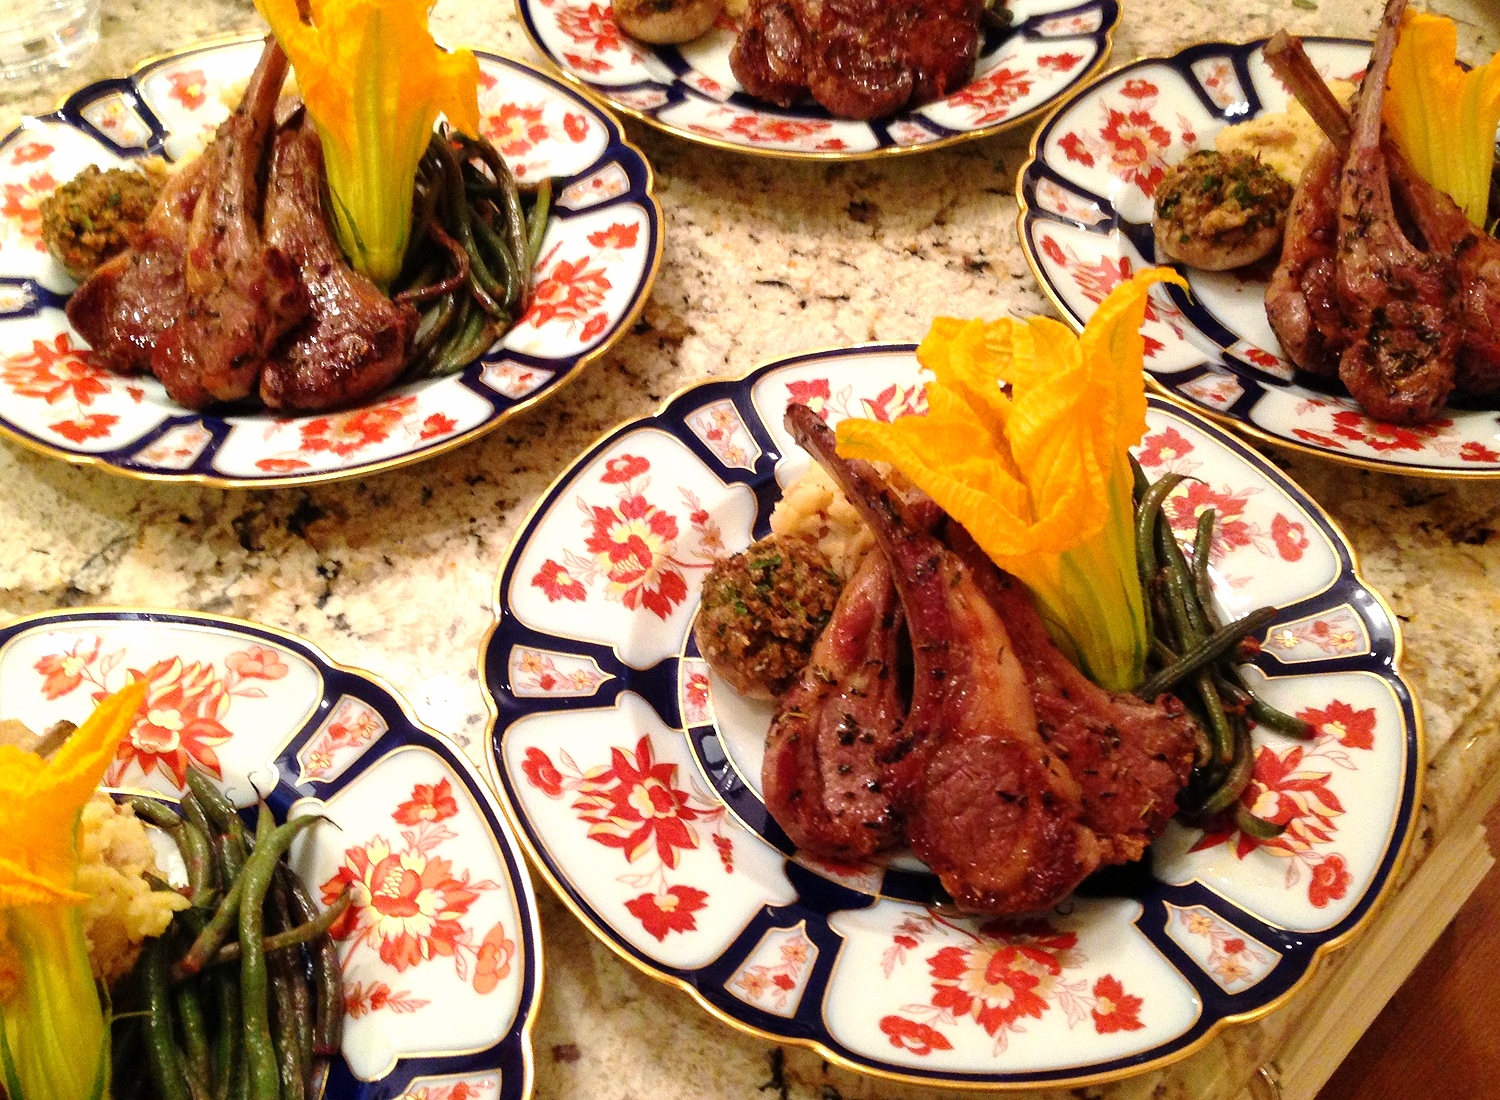 Lamb chops scottadito with herbs de Provence, stuffed mushrooms, French green beans, and zucchini flower